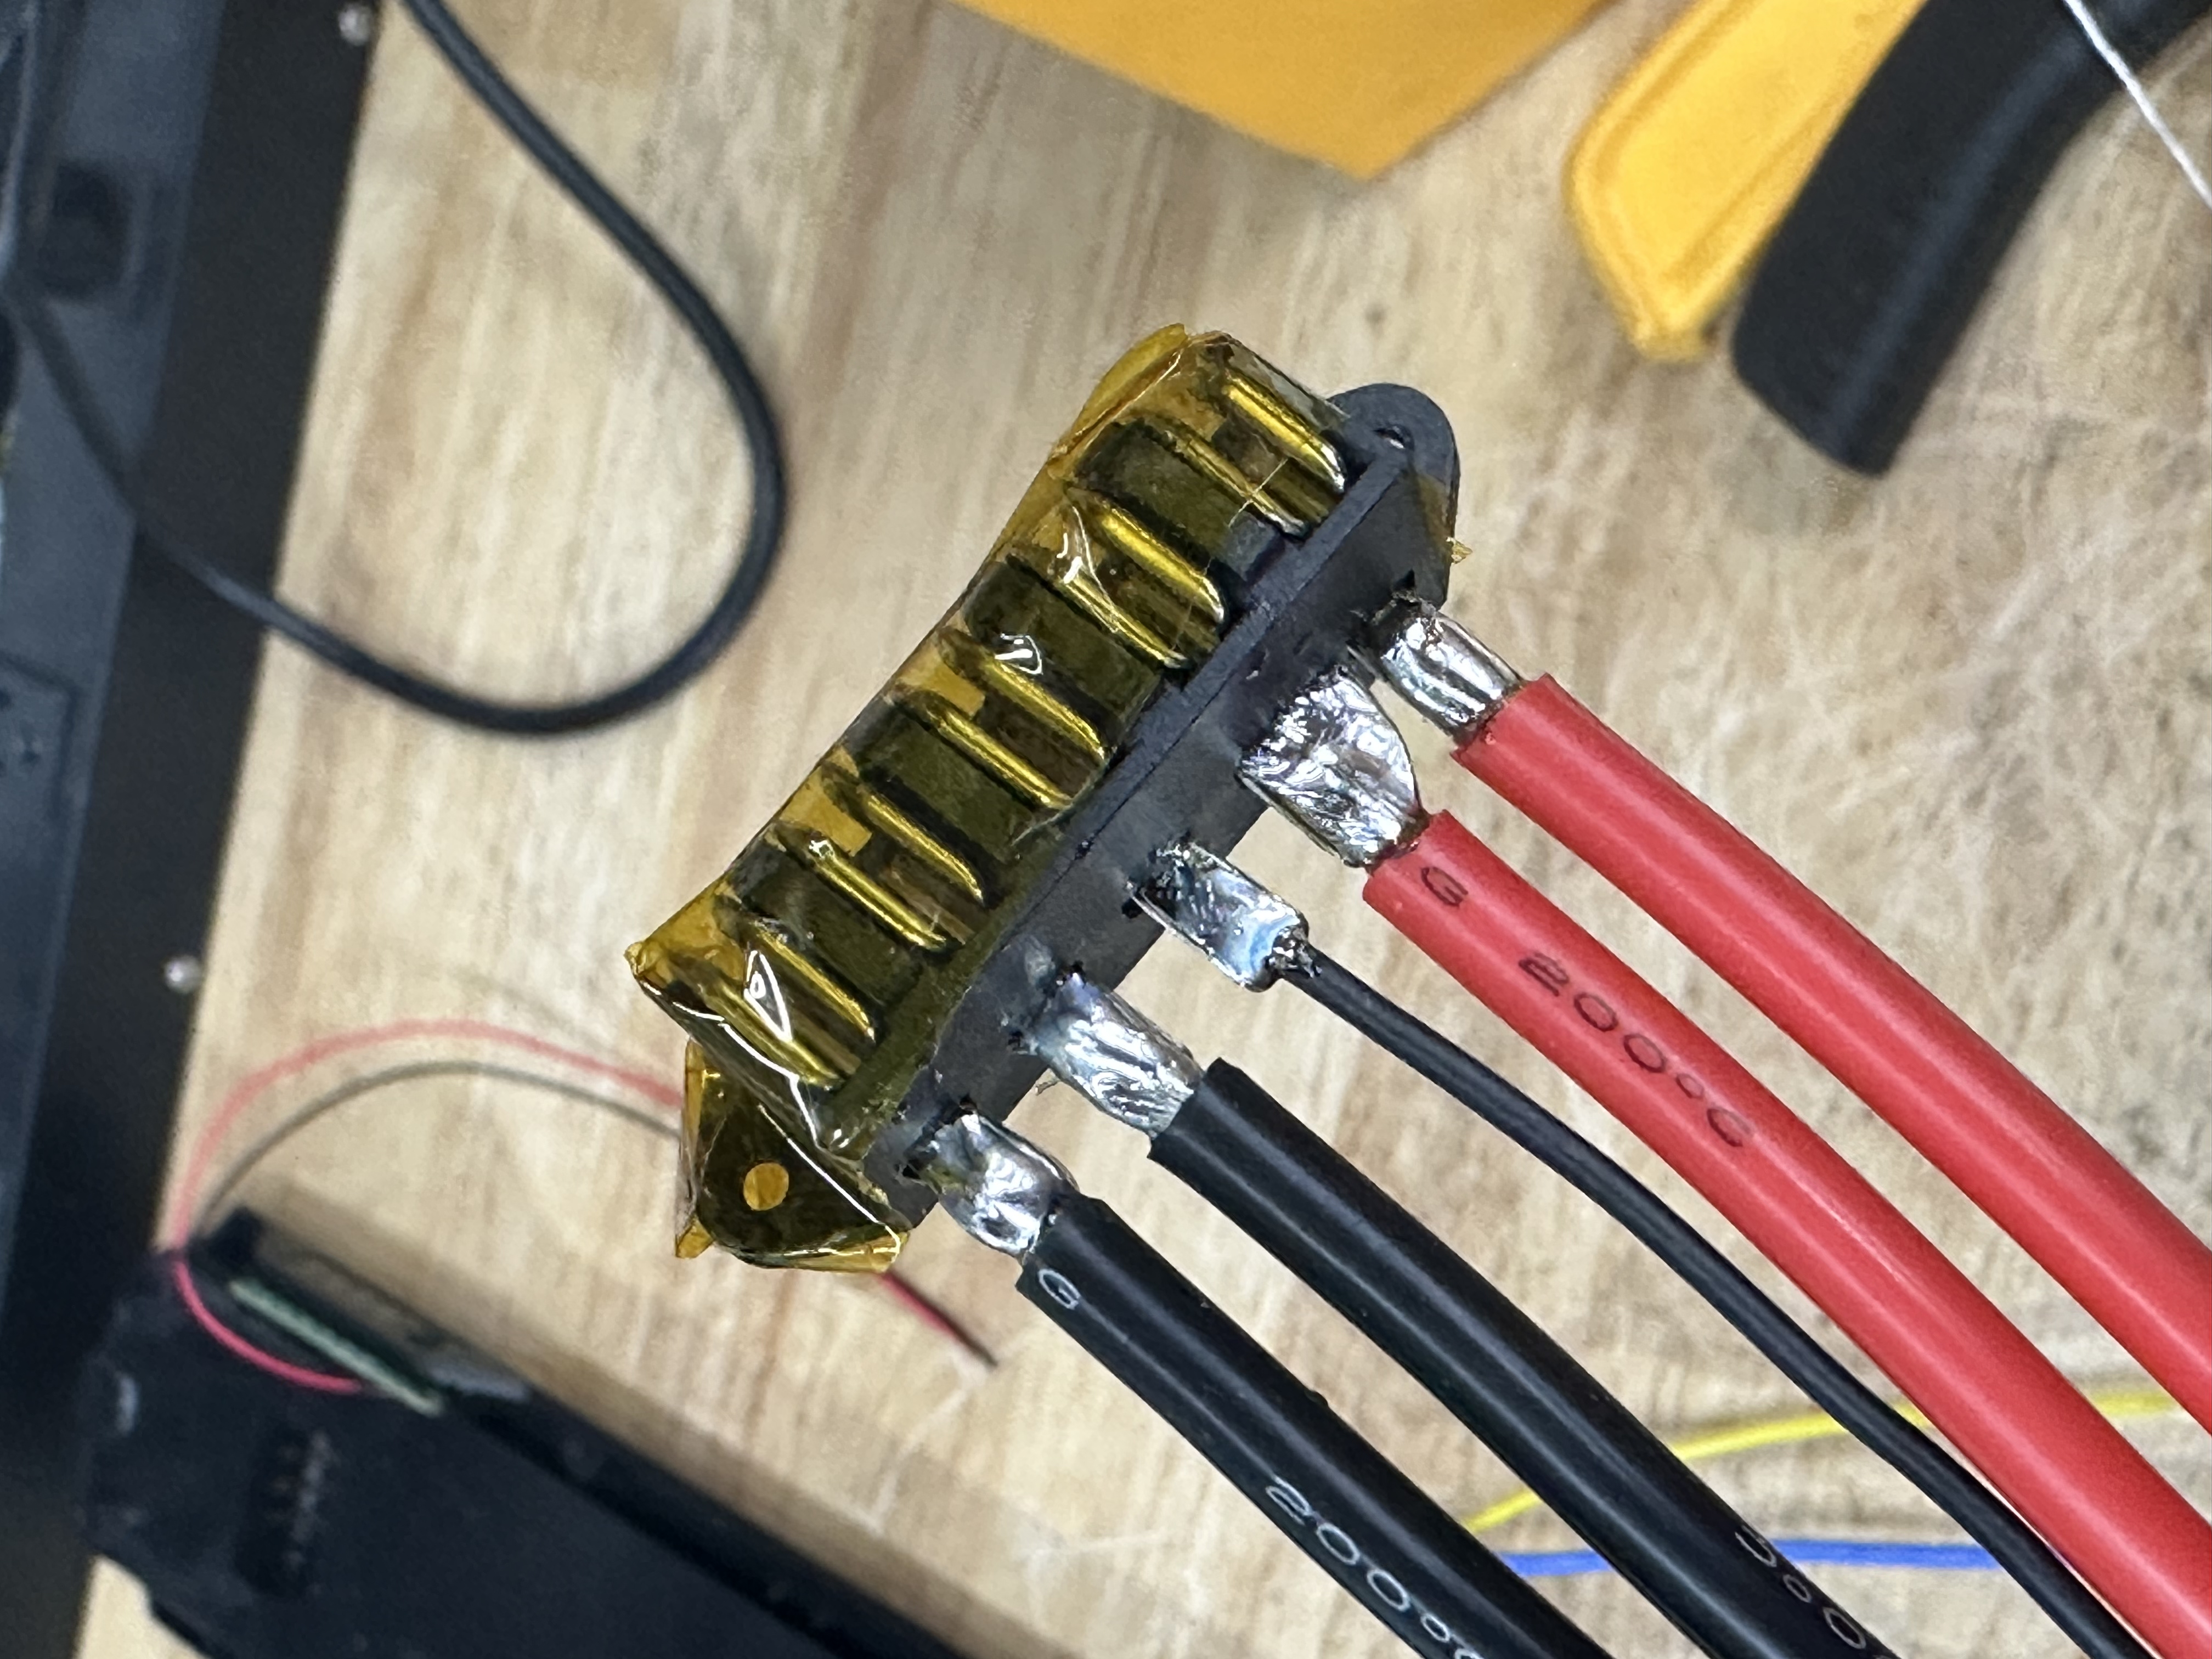 Five wires connected to battery terminals